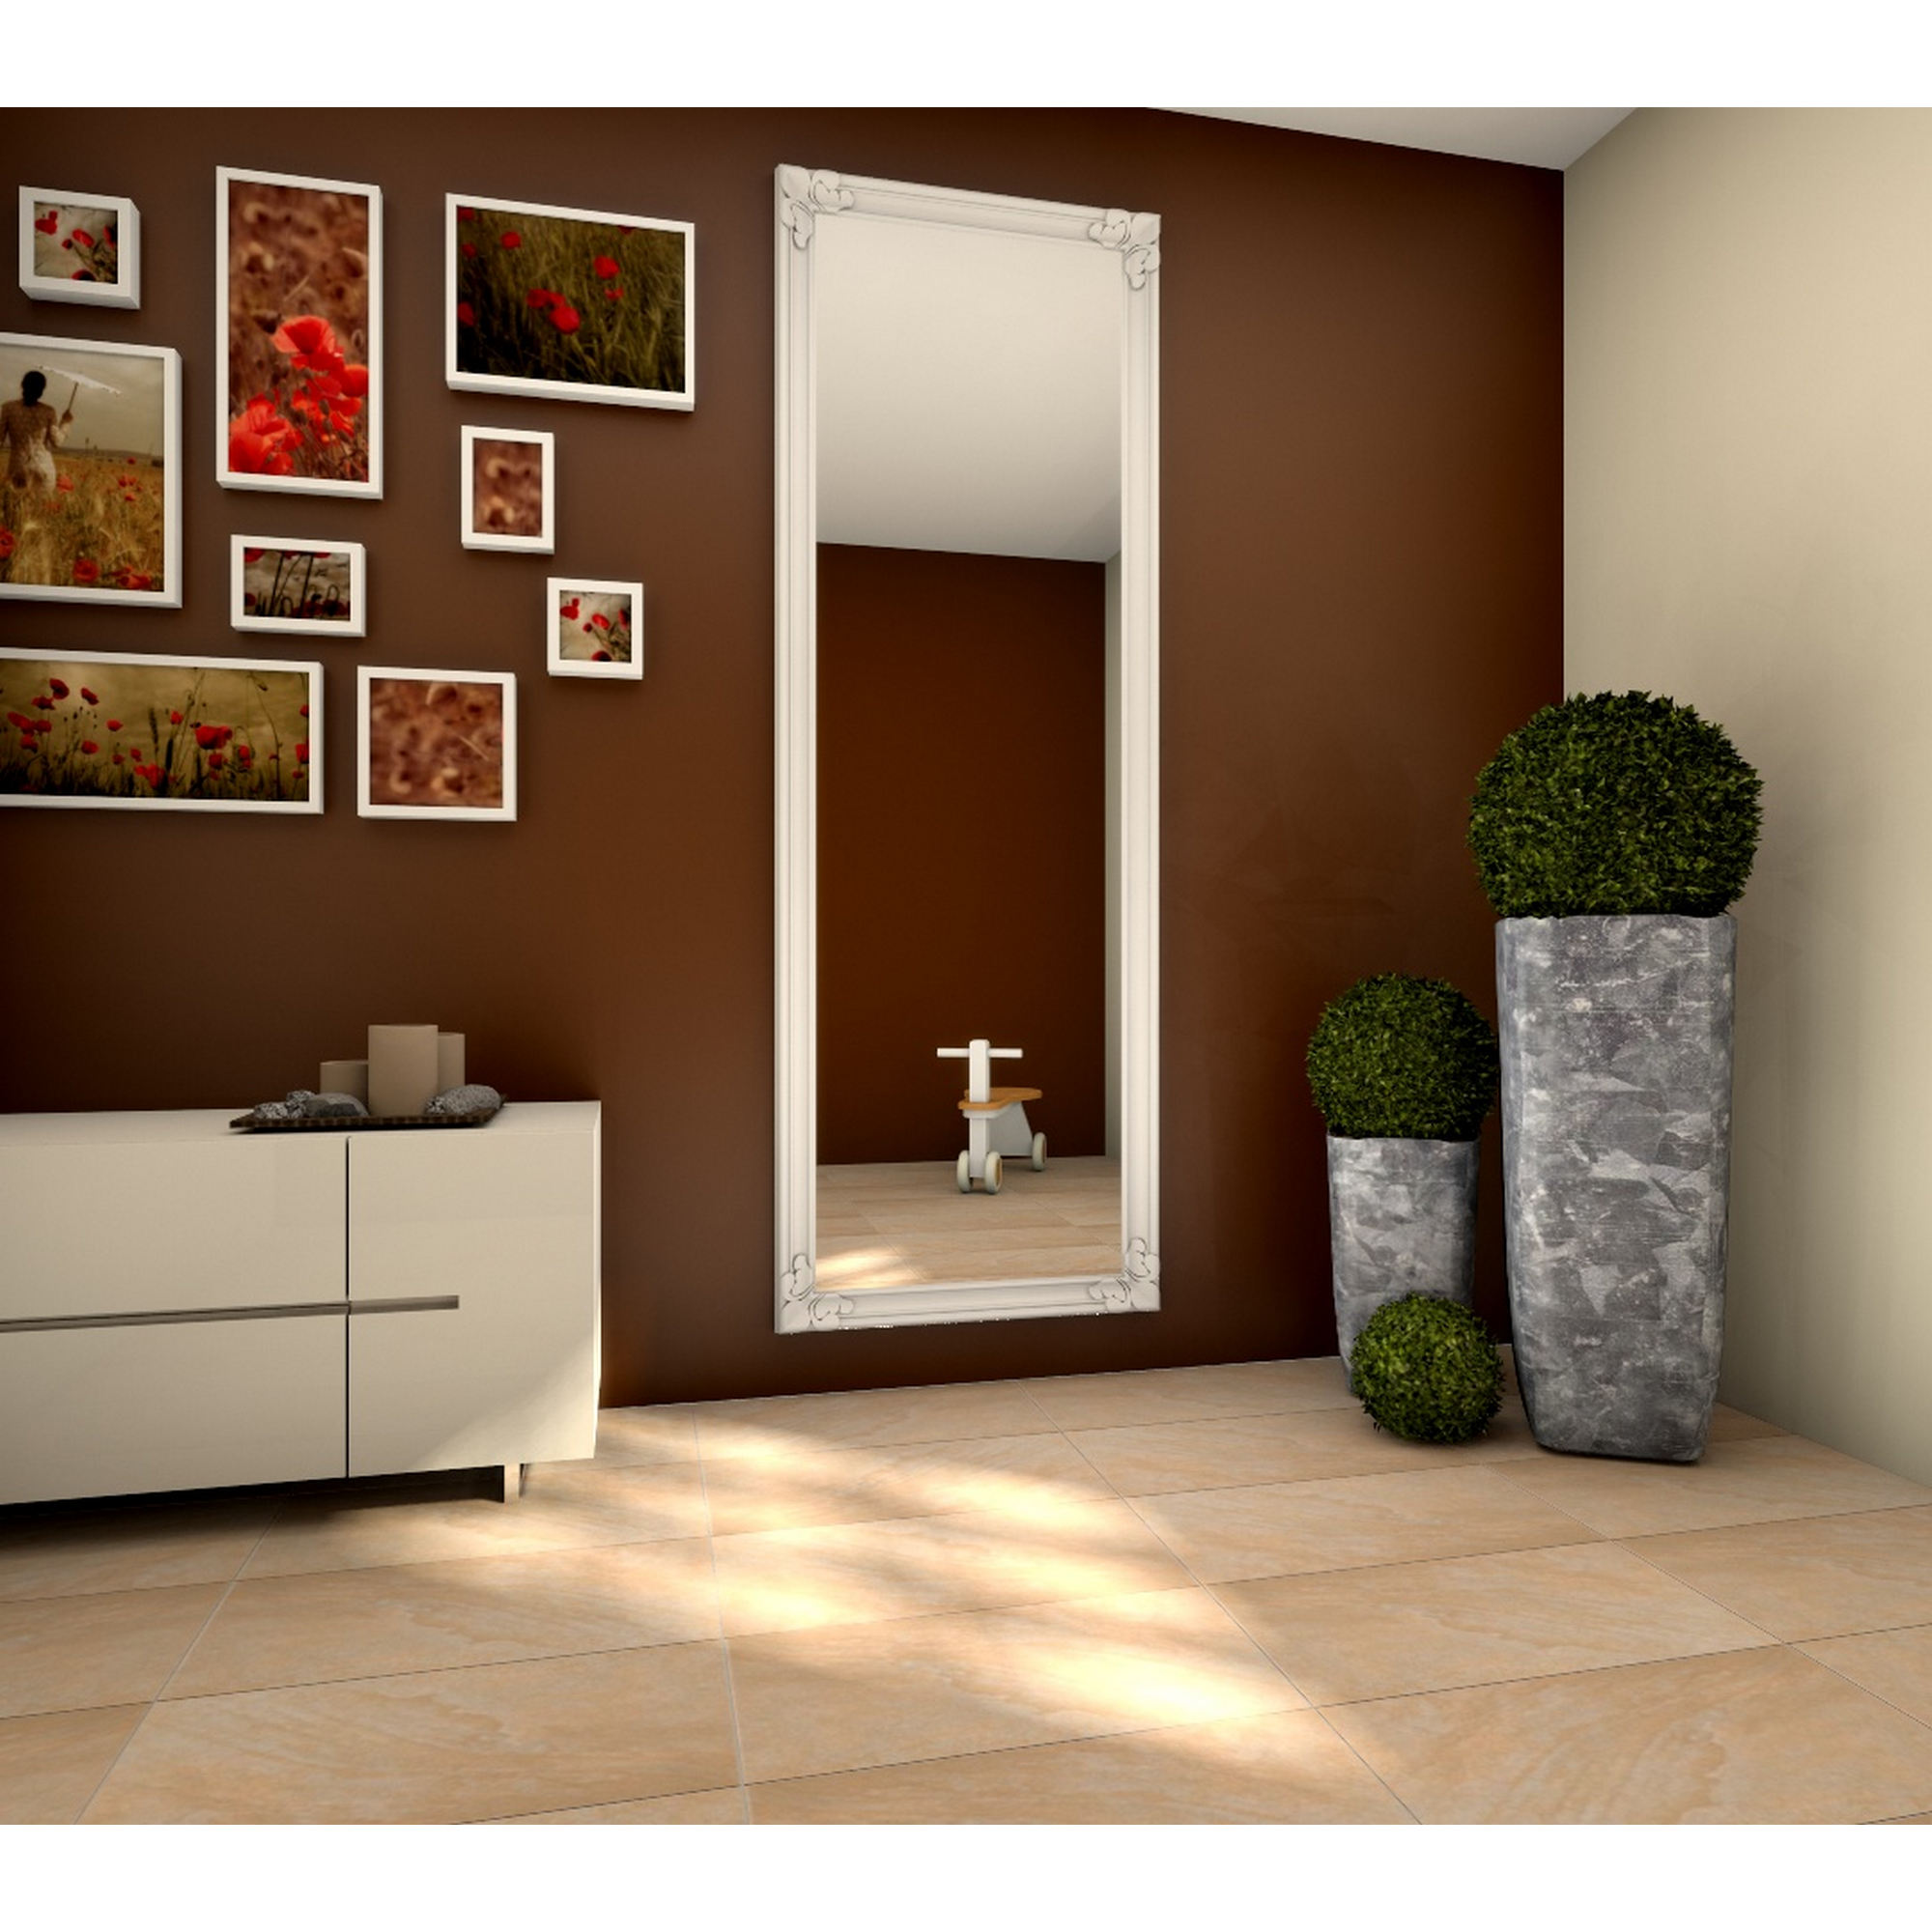 Bodenfliese Miele beige 30,5x61cm + product picture